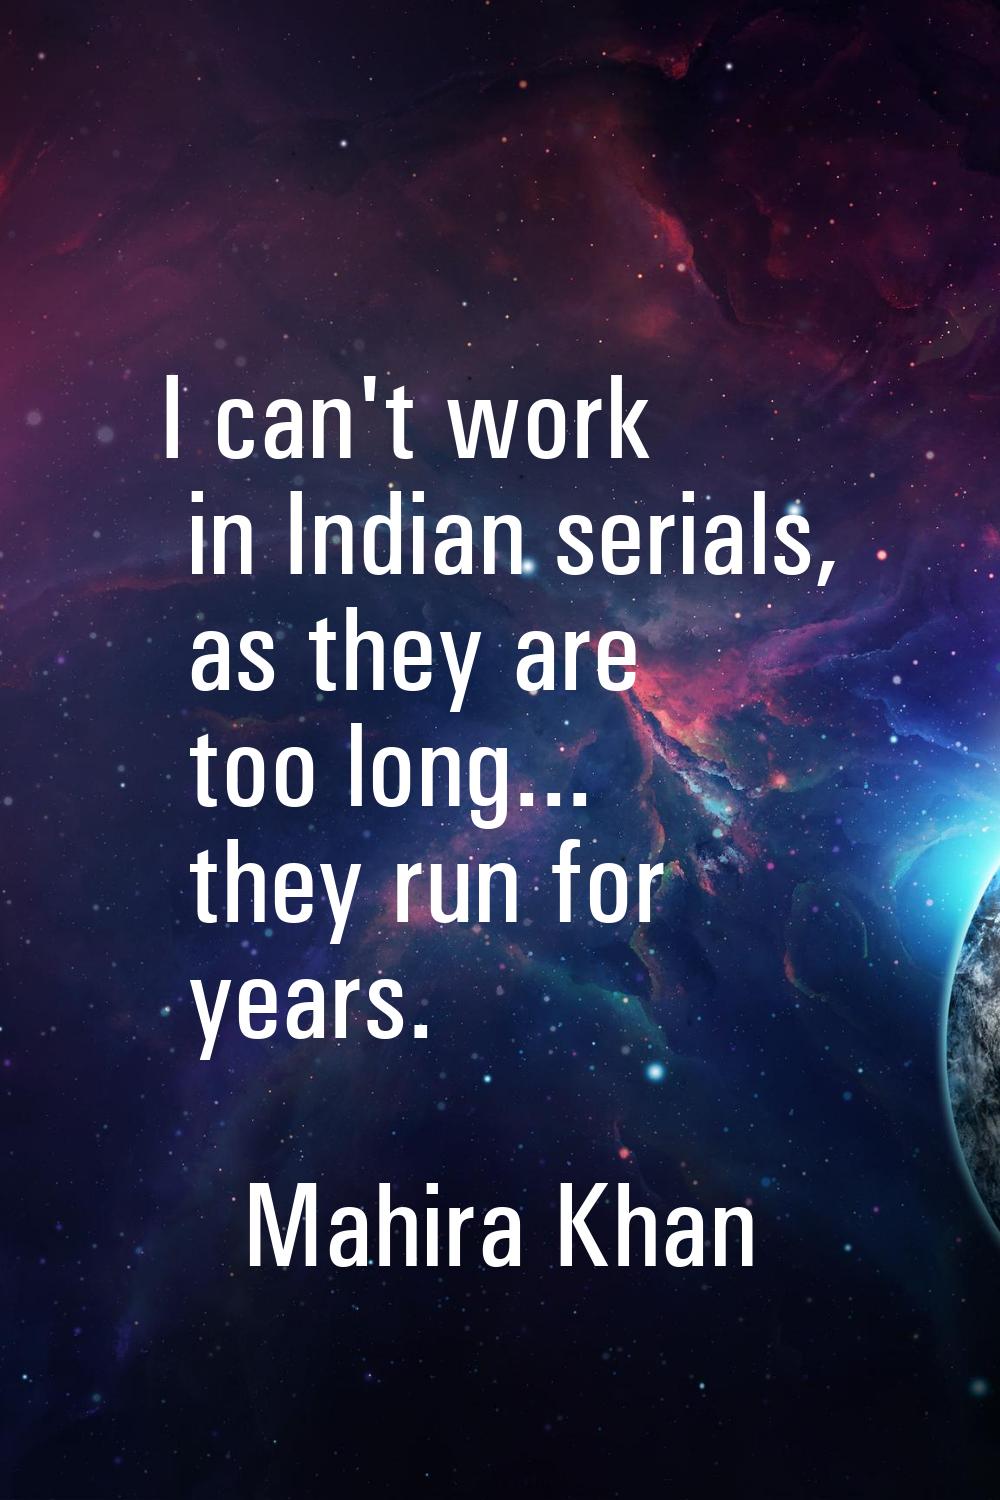 I can't work in Indian serials, as they are too long... they run for years.